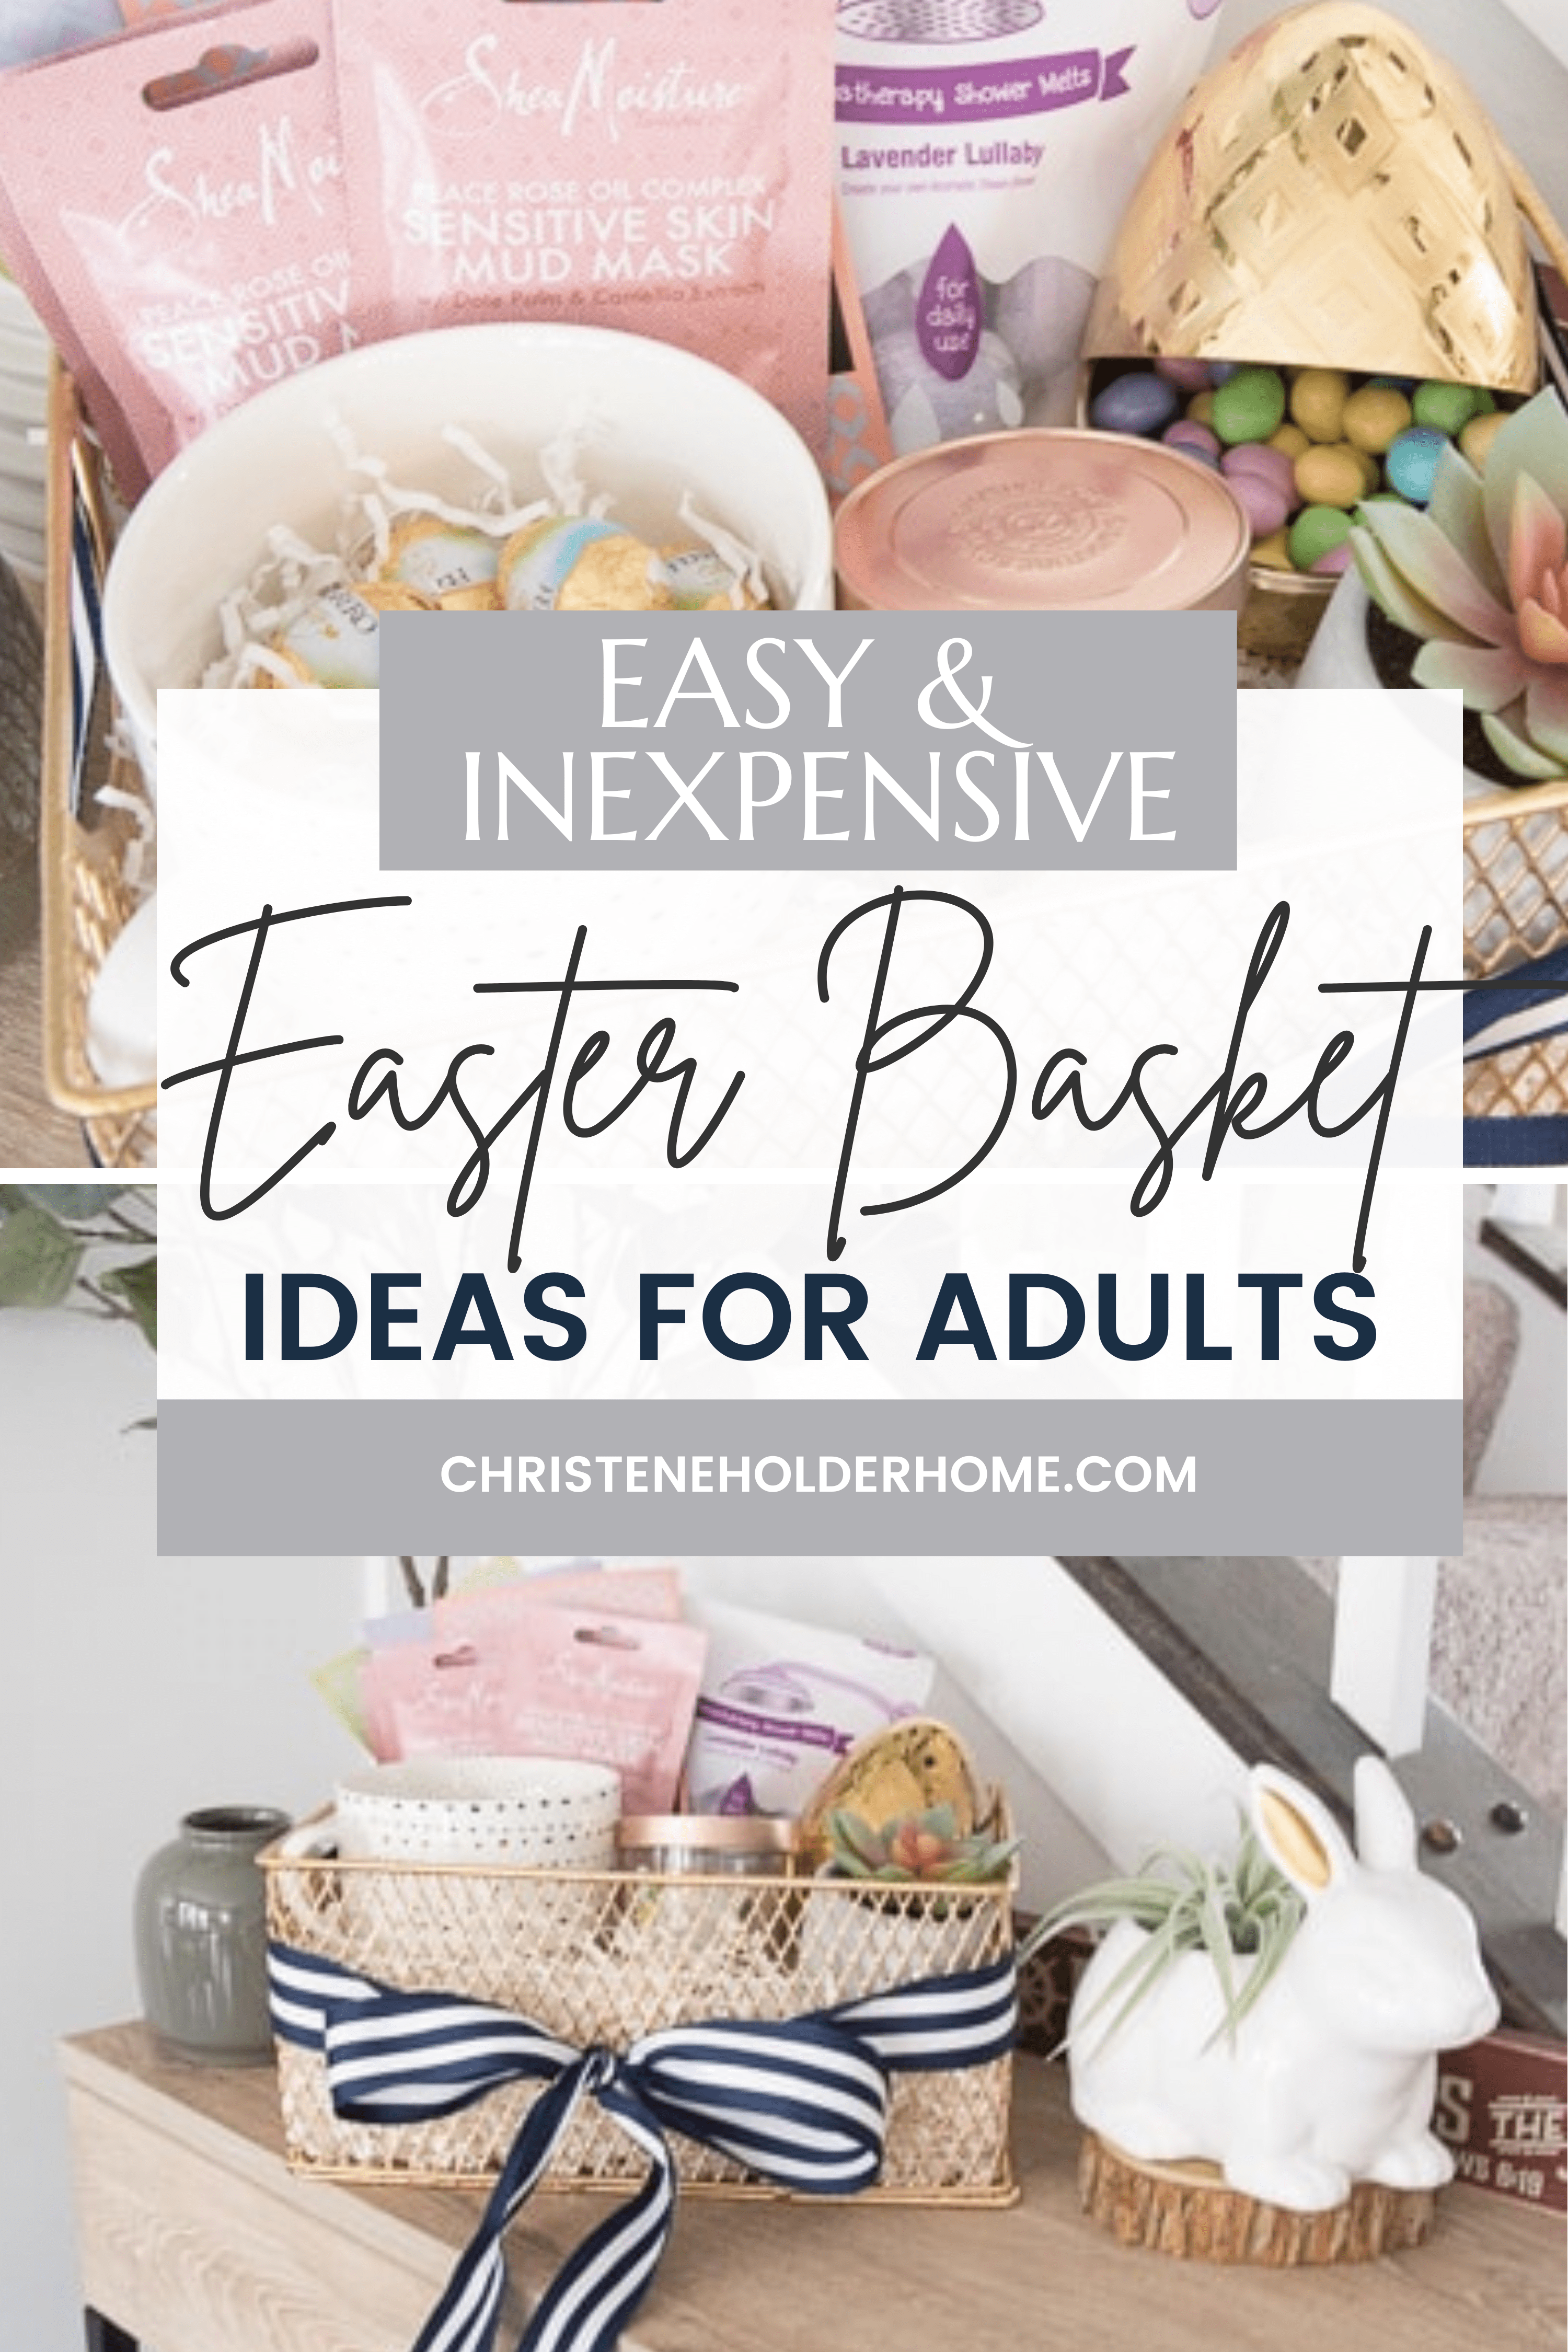 Easy and Inexpensive Easter Basket Ideas for Adults